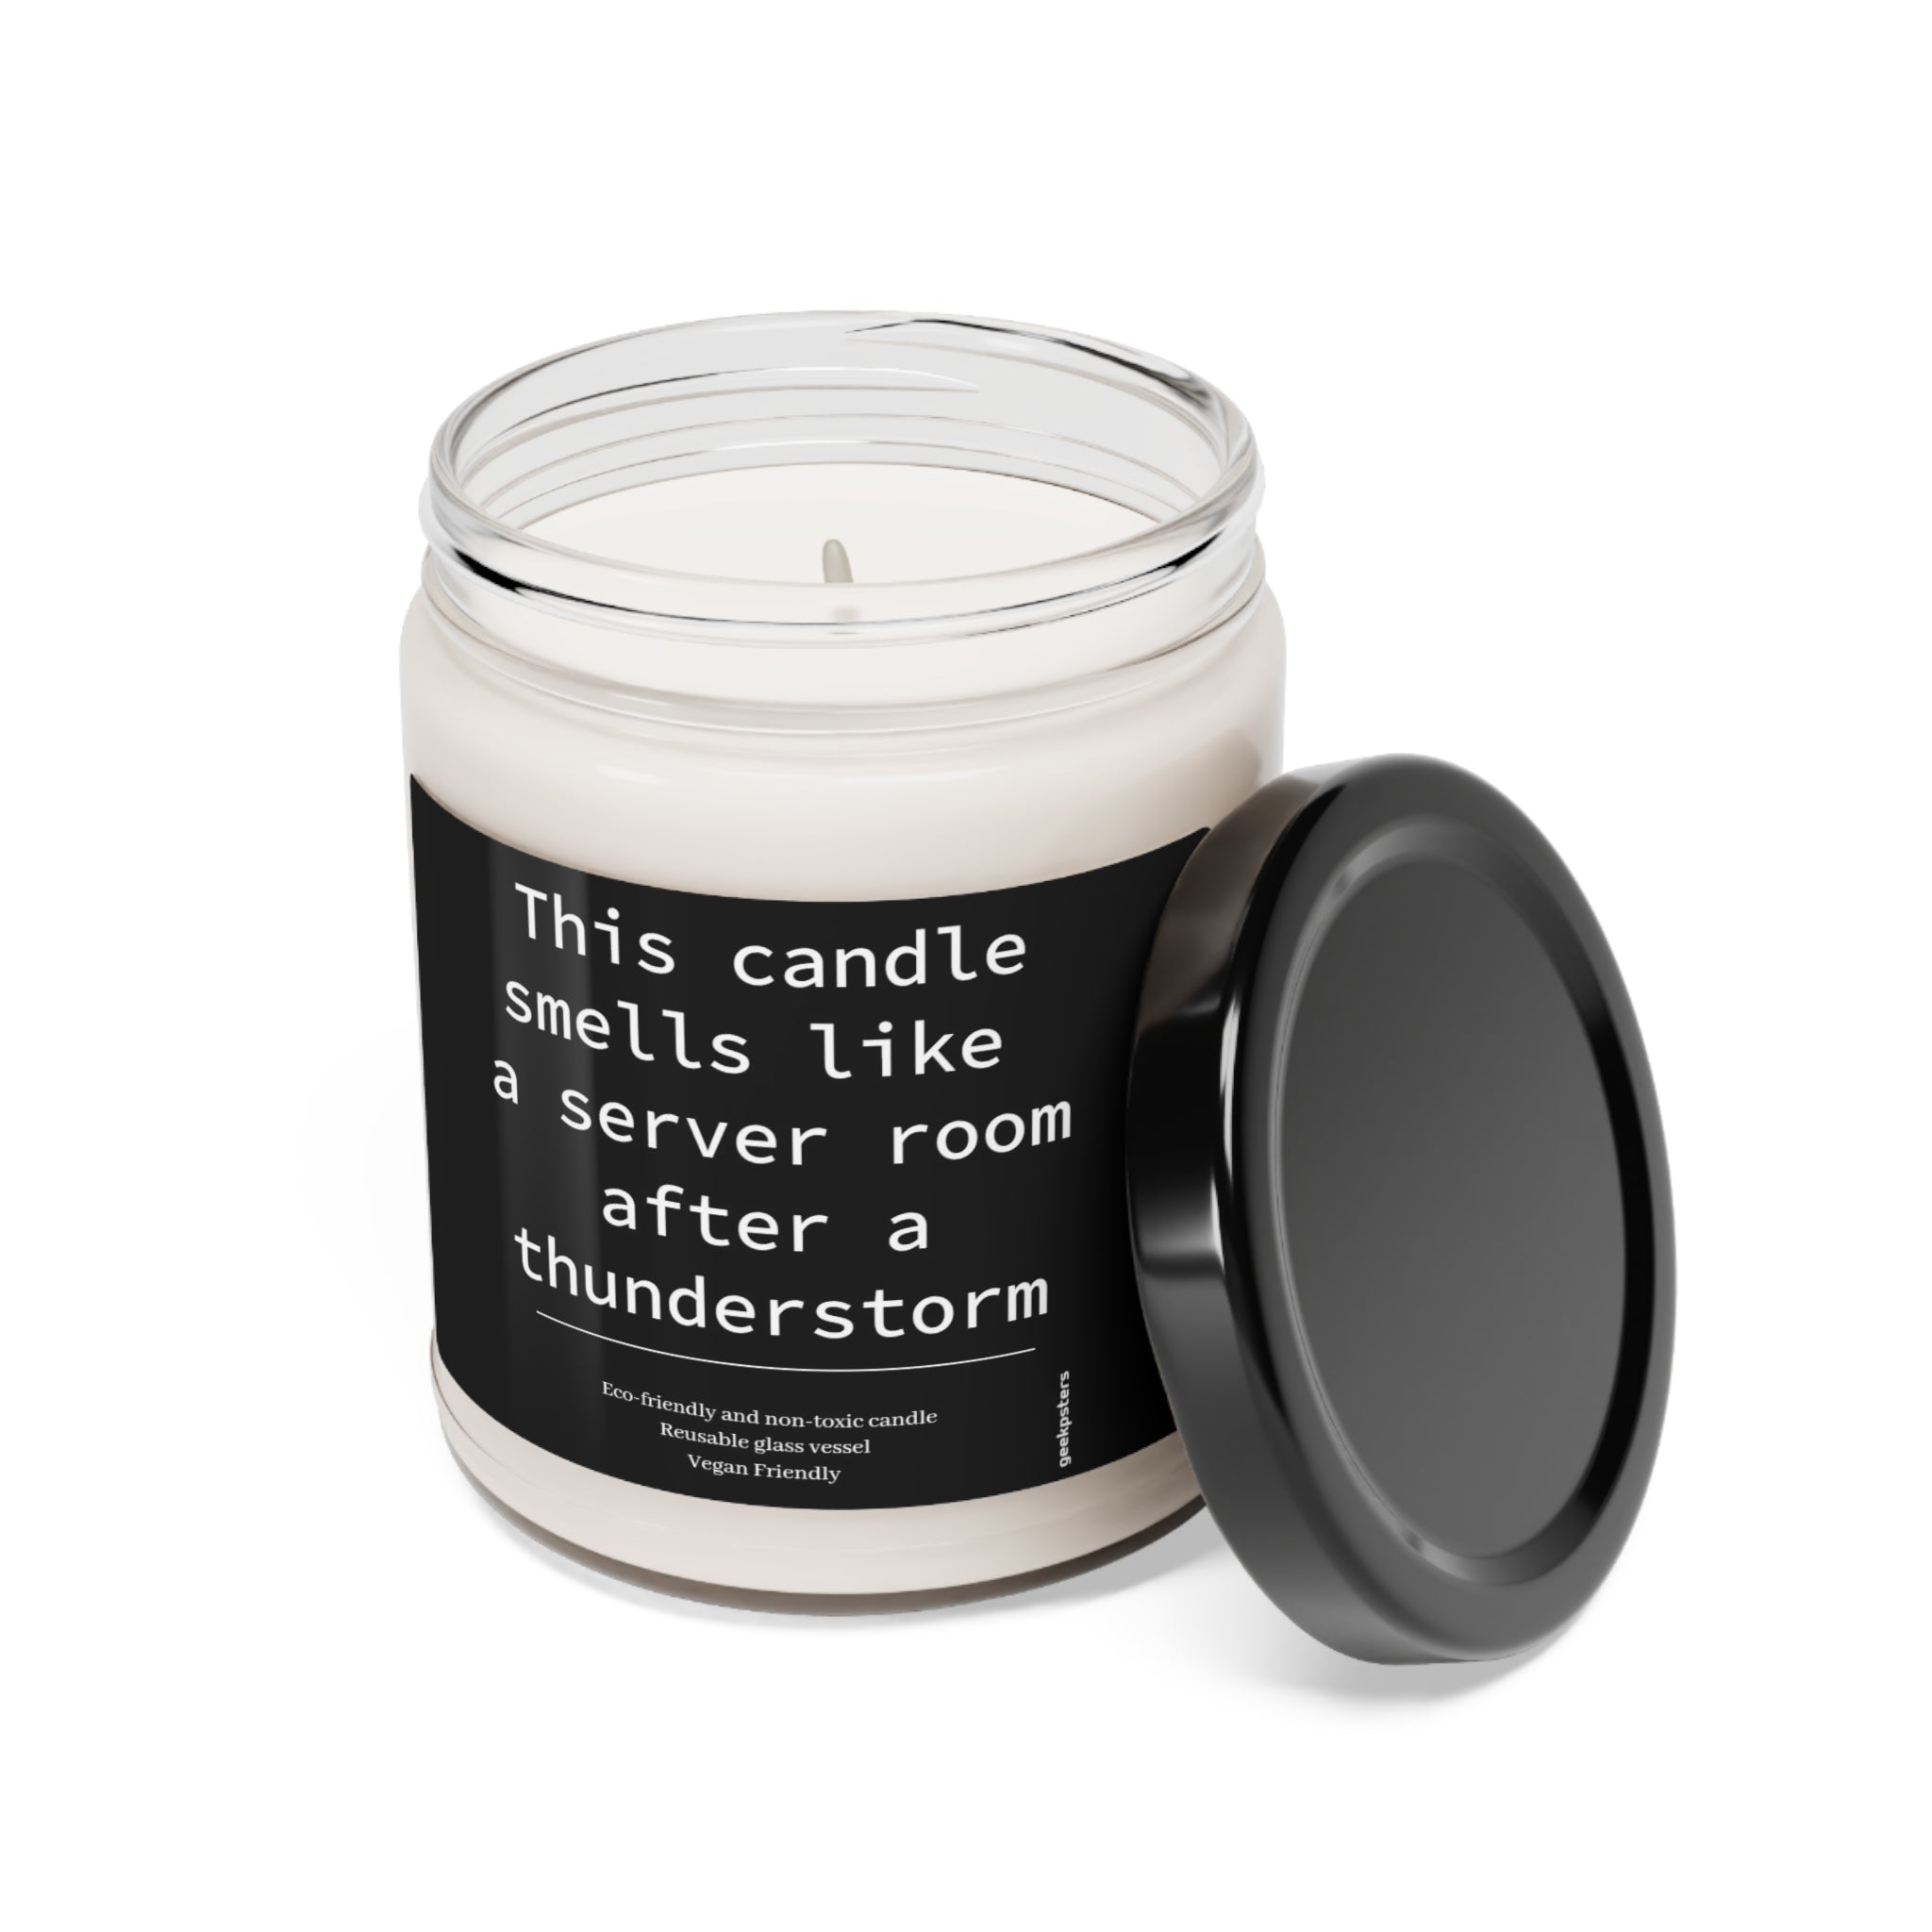 A natural soy wax blend scented candle with a label stating "this candle smells like a server room after a thunderstorm.
Product Name: This Candle Smells Like a Server Room After a Thunderstorm - Scented Soy Candle, 9oz